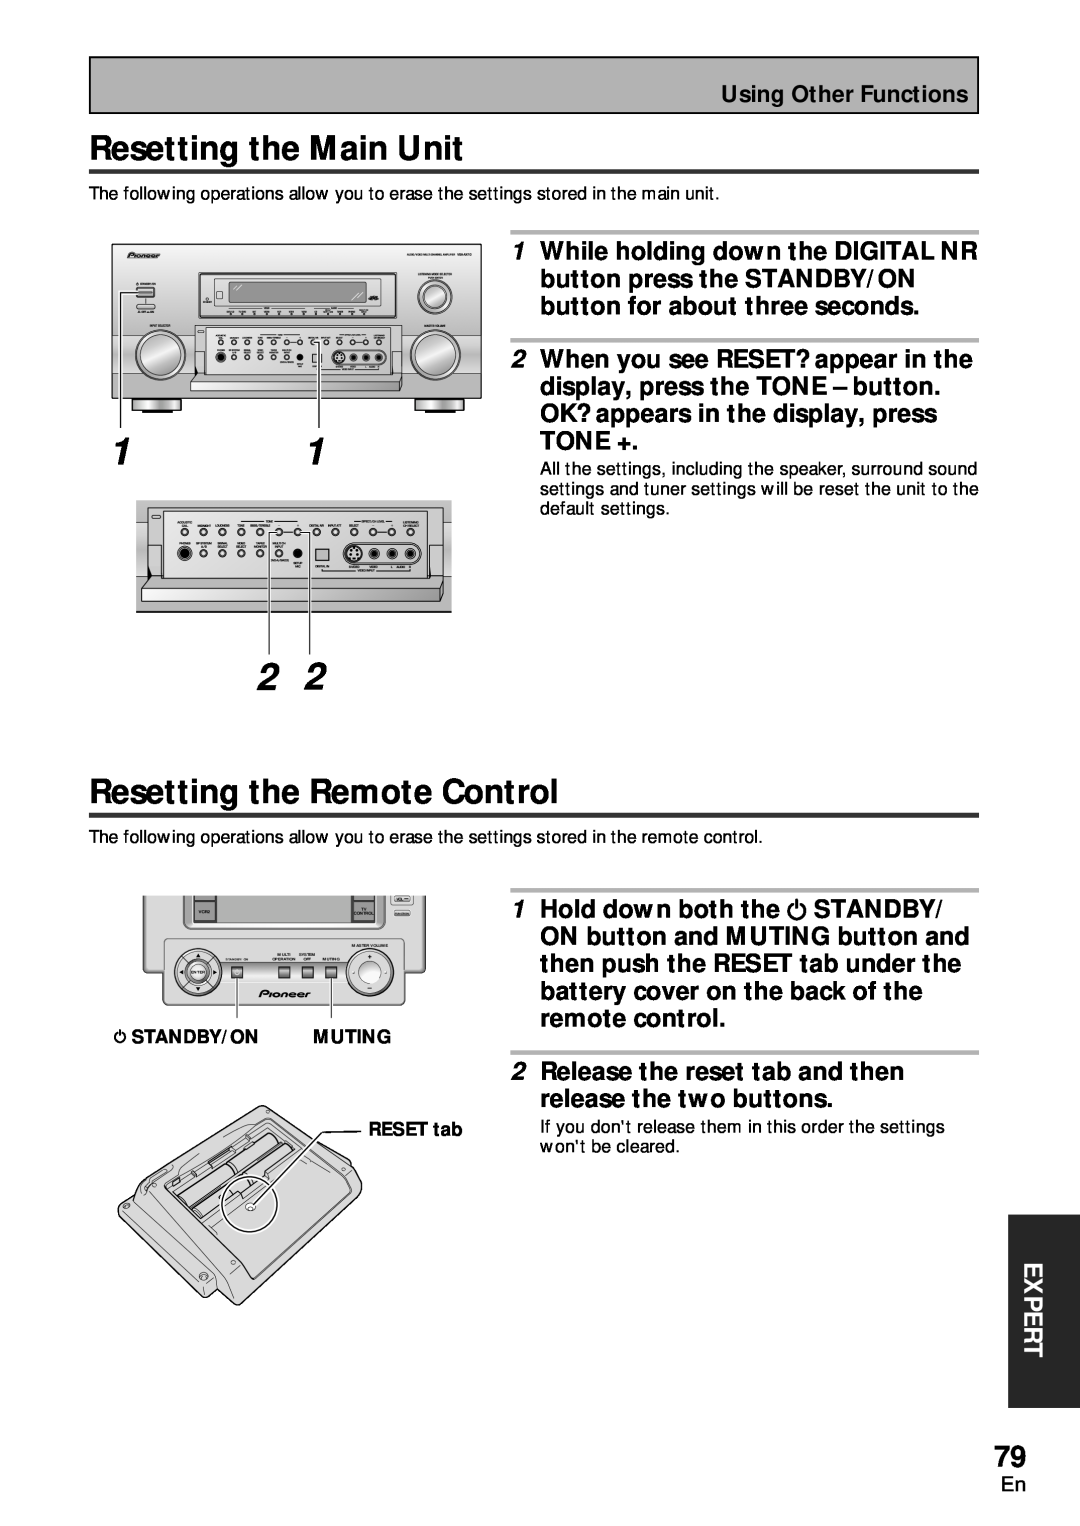 Pioneer VSA-AX10 Resetting the Main Unit, Resetting the Remote Control, Tone +, Release the reset tab and then, Expert 